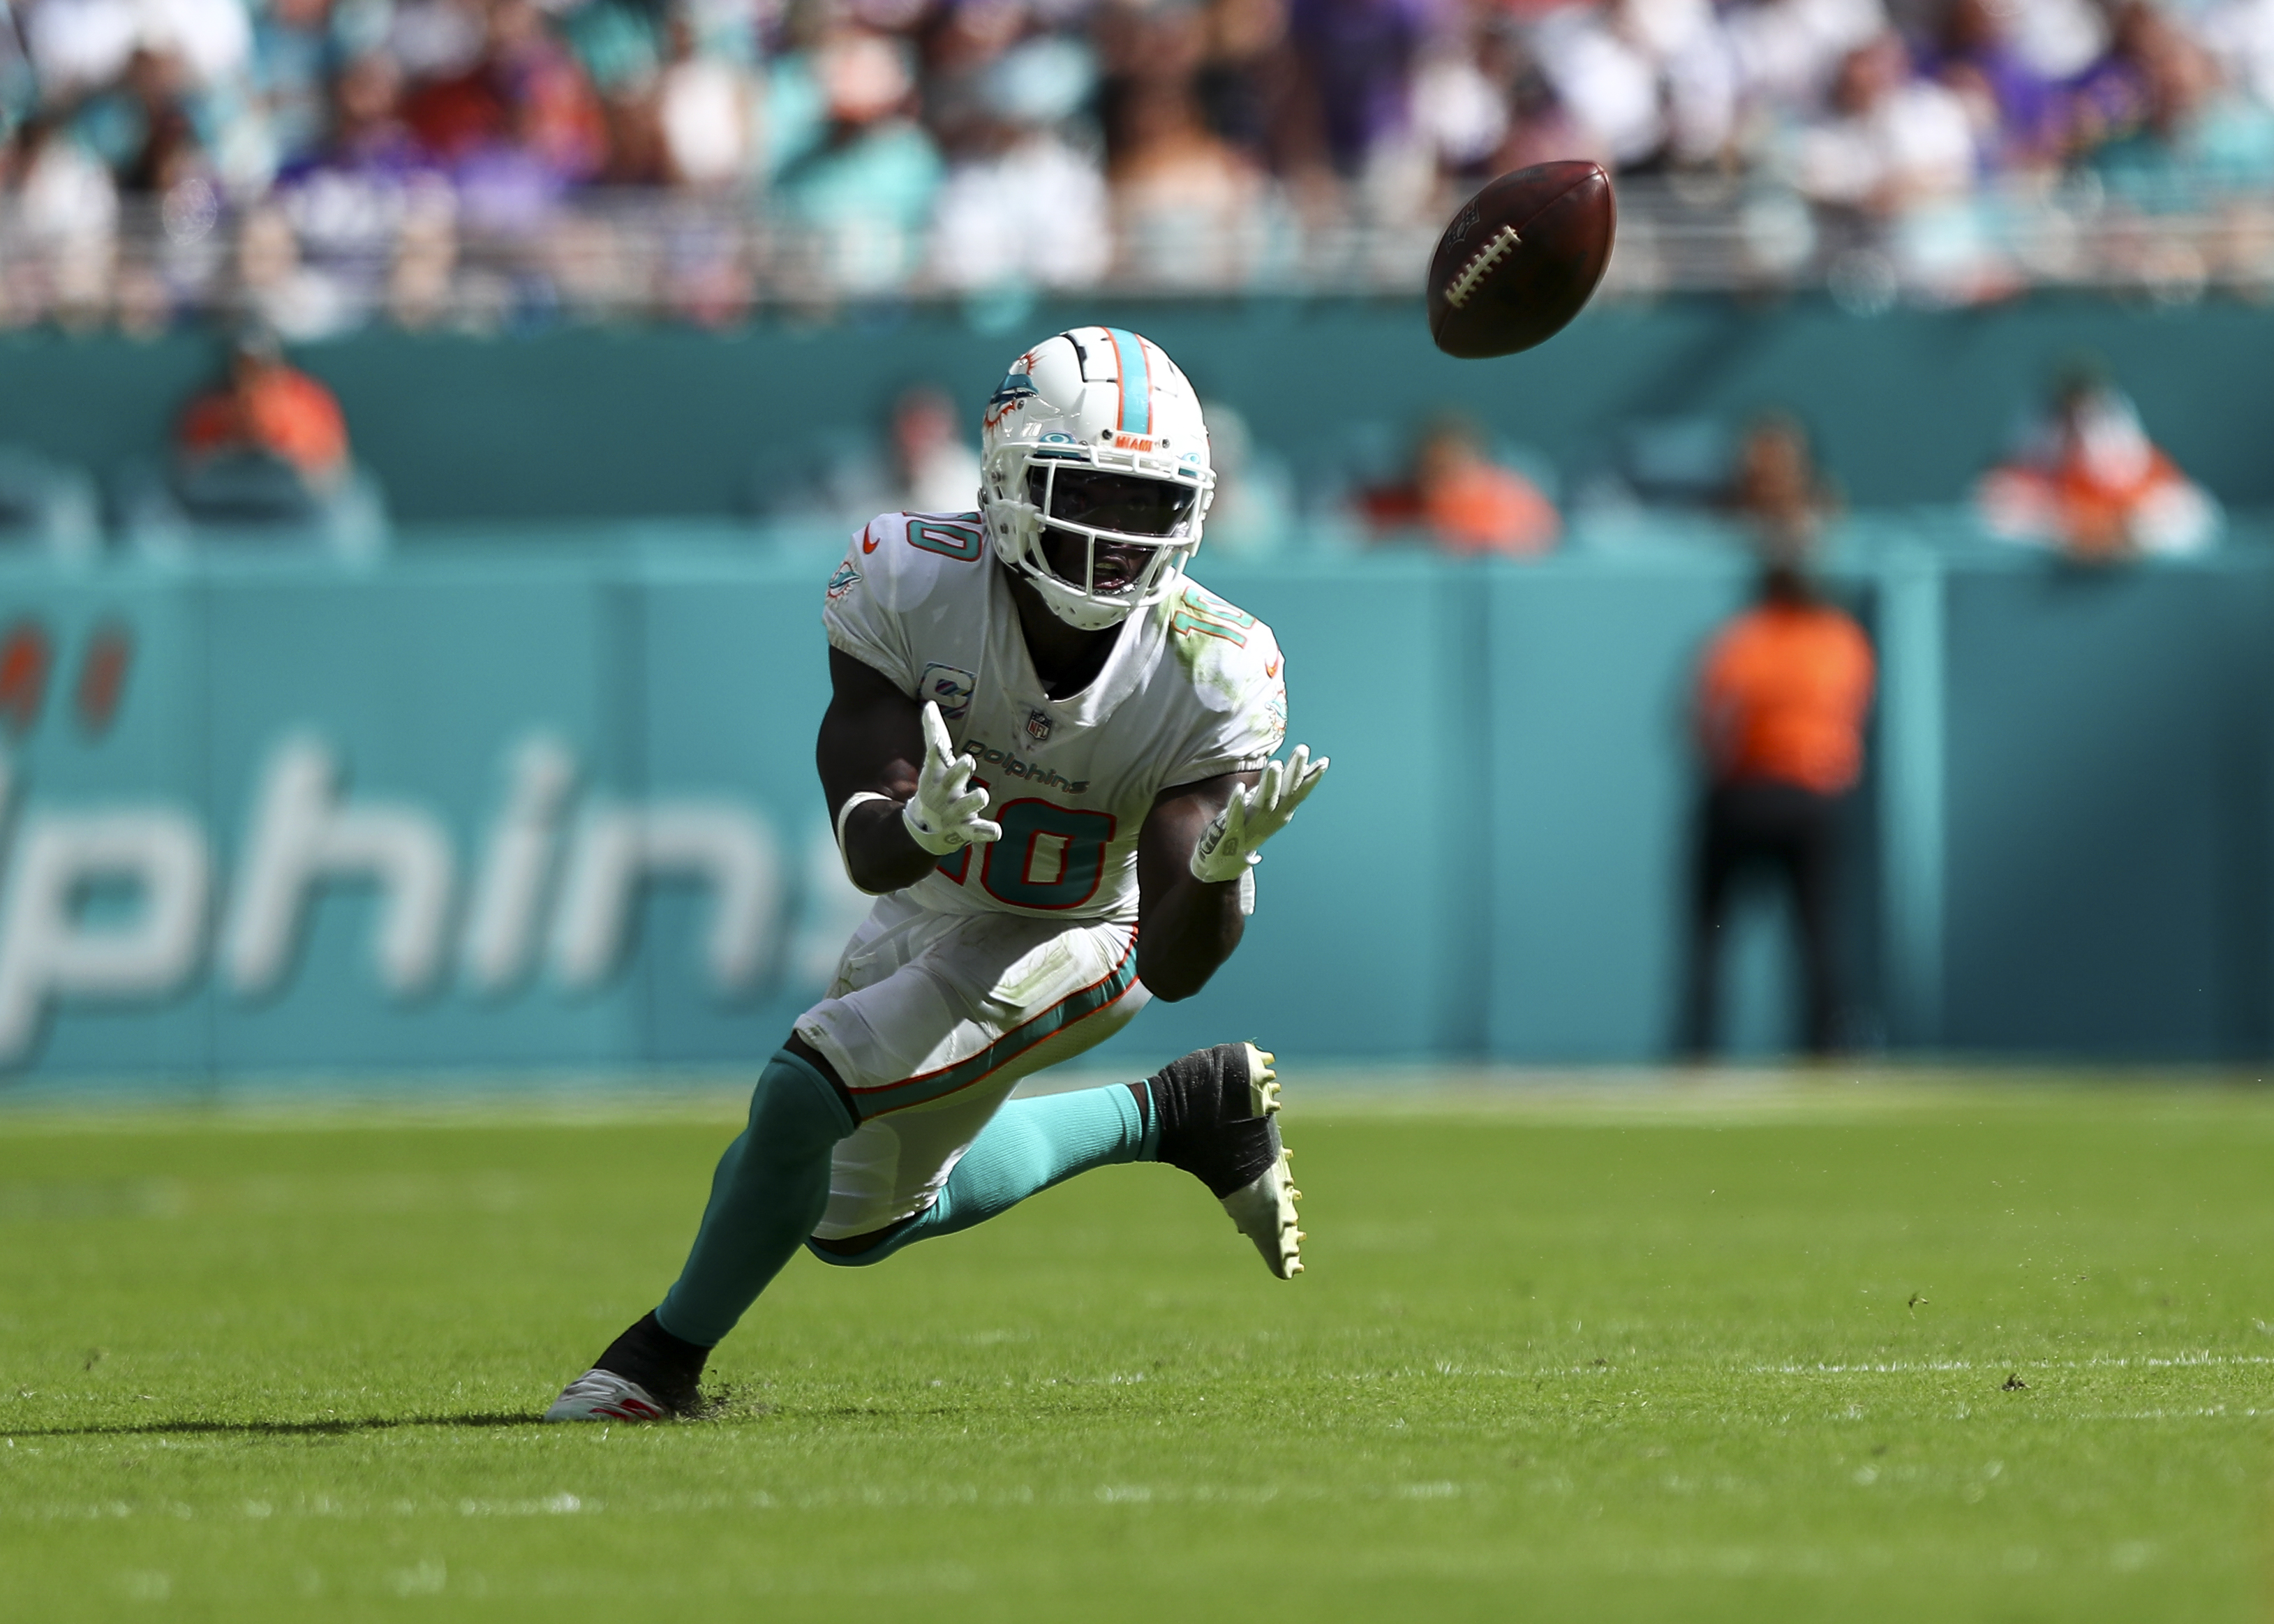 Wide receiver Tyreek Hill  of the Miami Dolphins catches a pass in the game against the Minnesota Vikings at Hard Rock Stadium in Miami Gardens, Florida, October 16, 2022. /CFP 